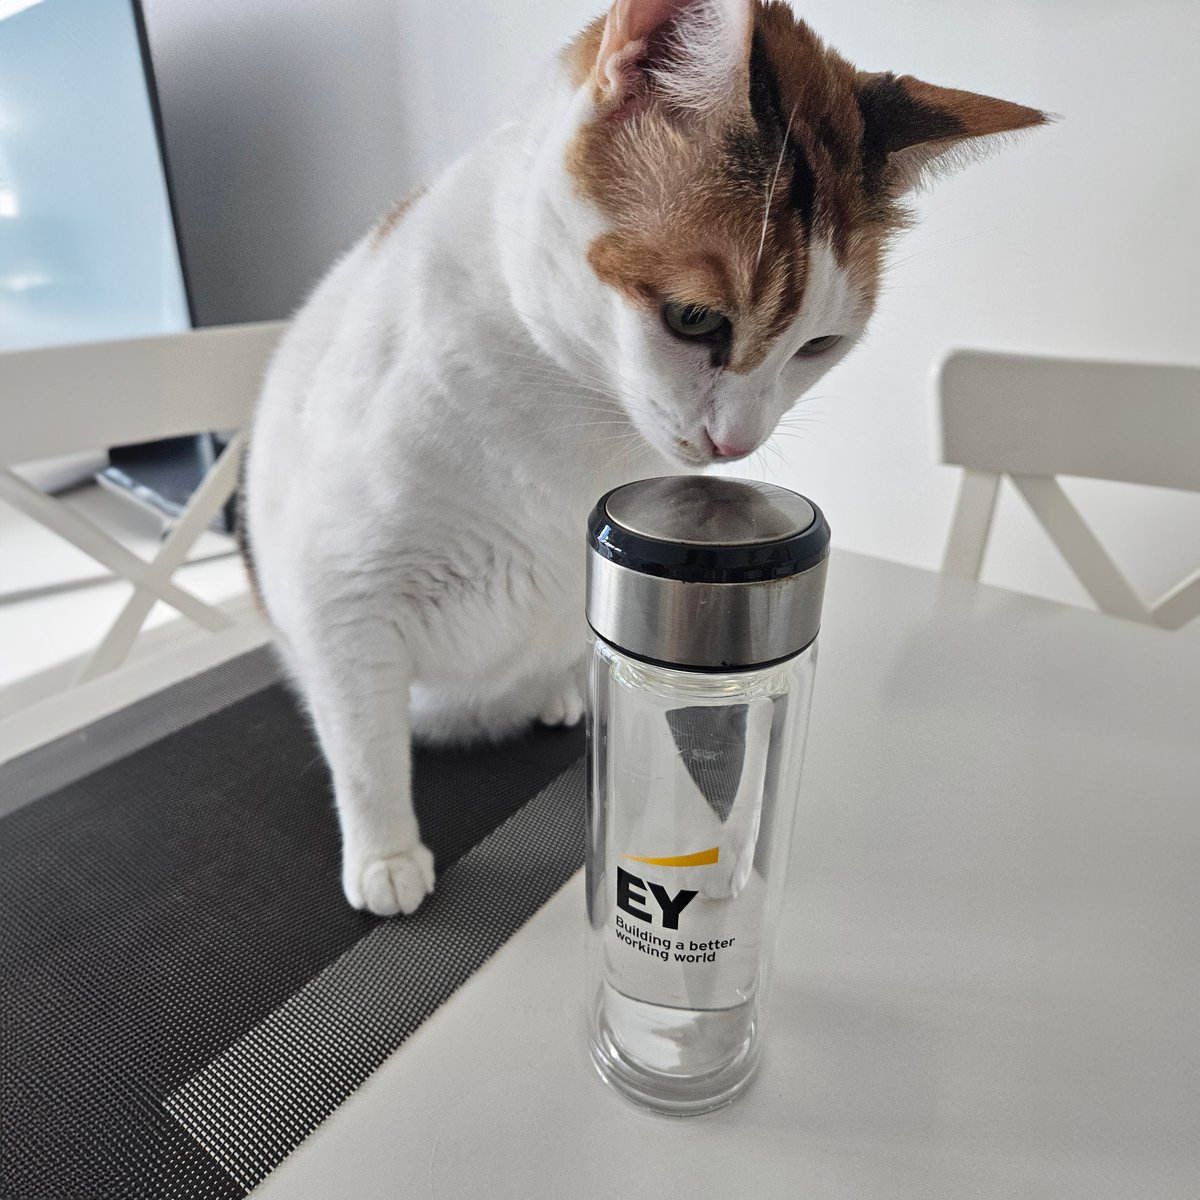 Monday's motivation from our feline colleague: Stay hydrated while working! 
#EYMENACareers #YoursToBuild #BetterWorkingWorld